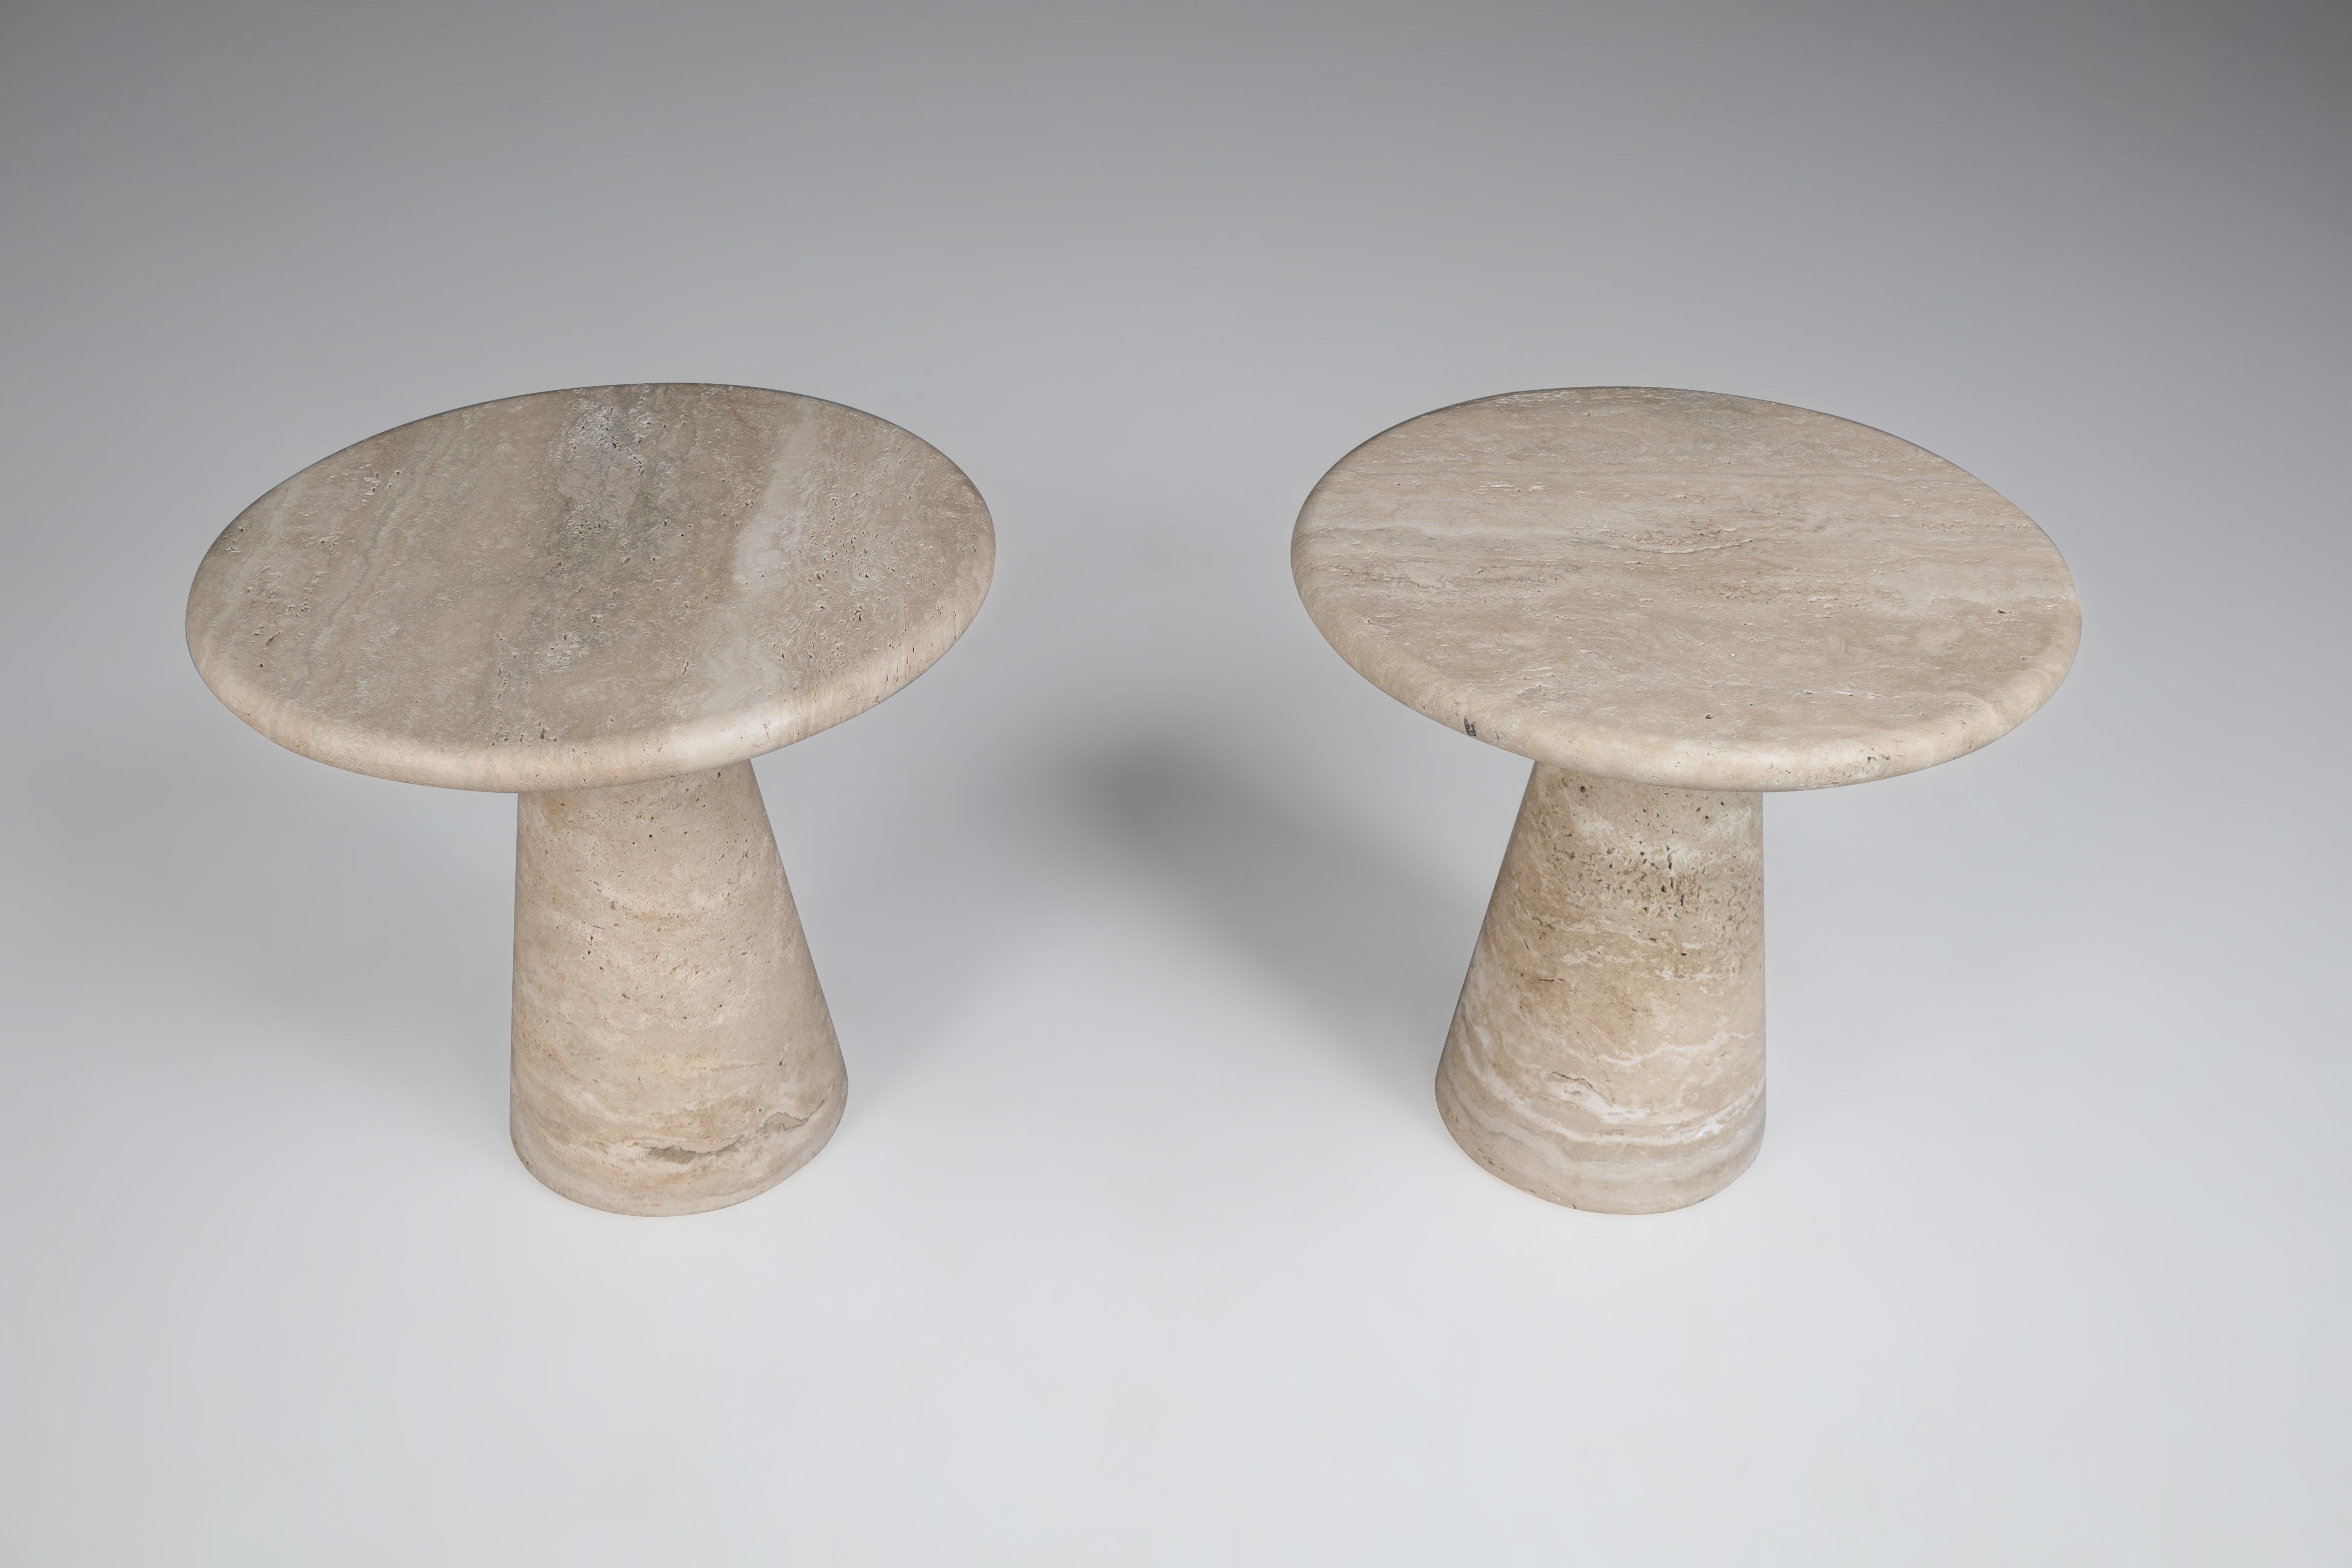  Travertine Circular Side Tables or Coffee Tables, Italy, 1980s  For Sale 5